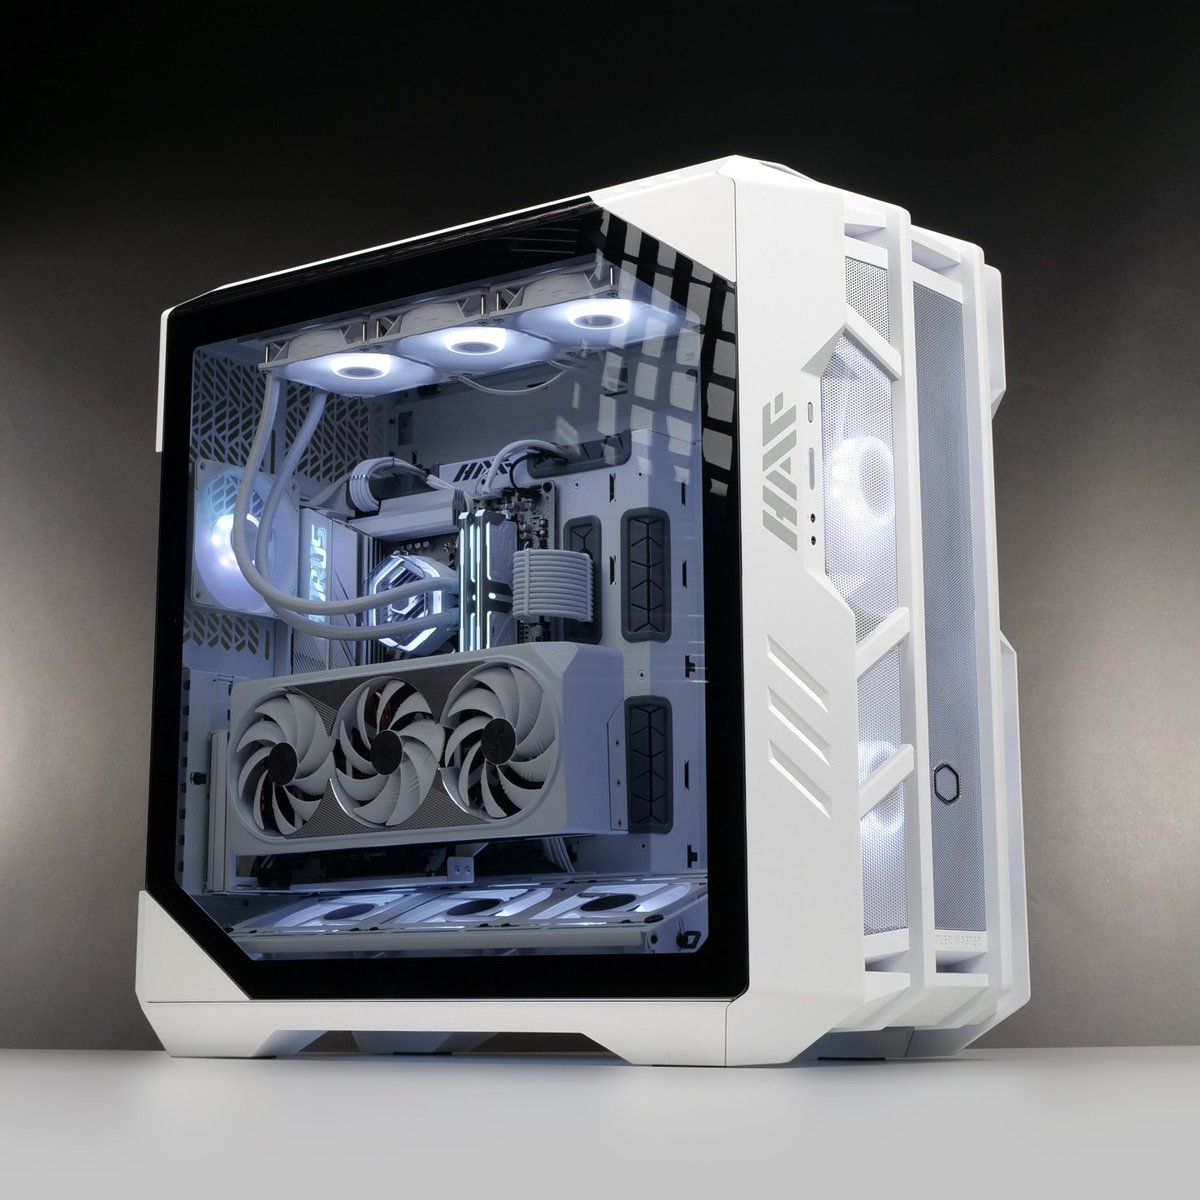 Behold the airflow king! The HAF 700 is now available in White Edition, available at @ScanComputers Featuring the white edition MasterLiquid Atmos 360 cooler ❄️ 📸 @battlerigs #MakeItYours